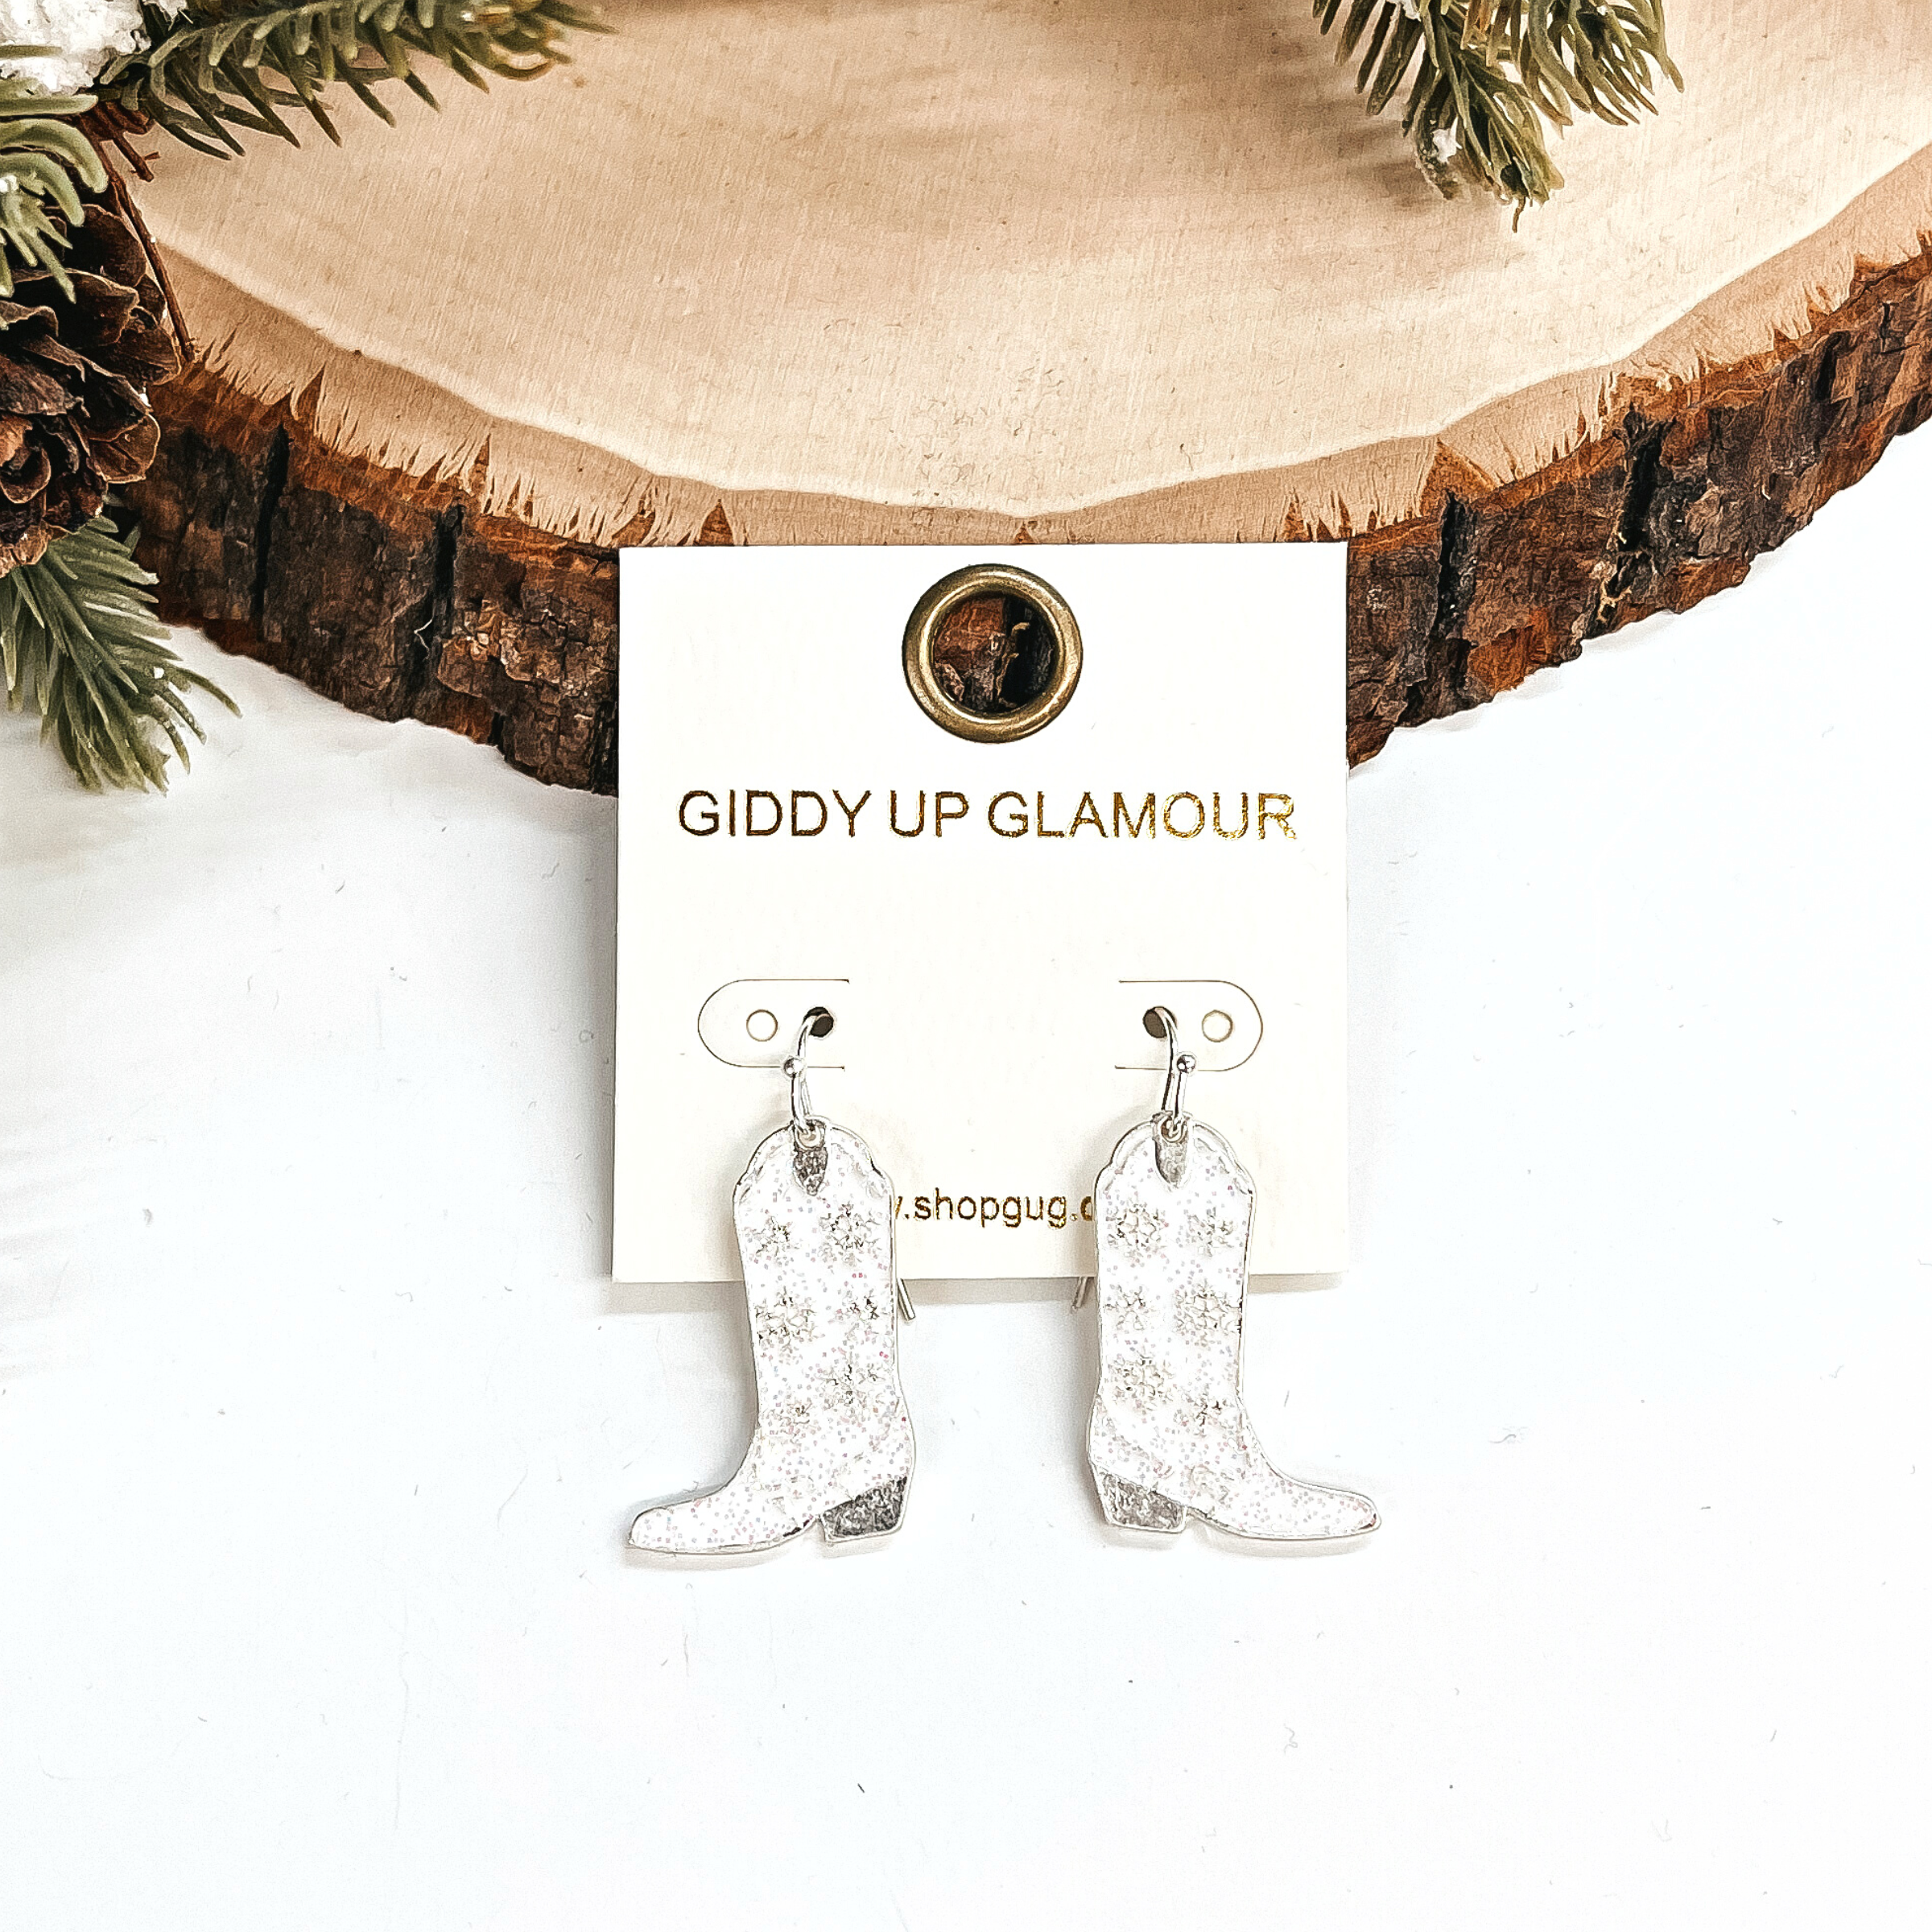 These are boot pendant drop earrings in white glitter and silver.  The earrings have a snowflake pattern in silver. These earrings are taken  leaning up against a slab of wood and on a white background with a pine cone  tree in the back as decor.